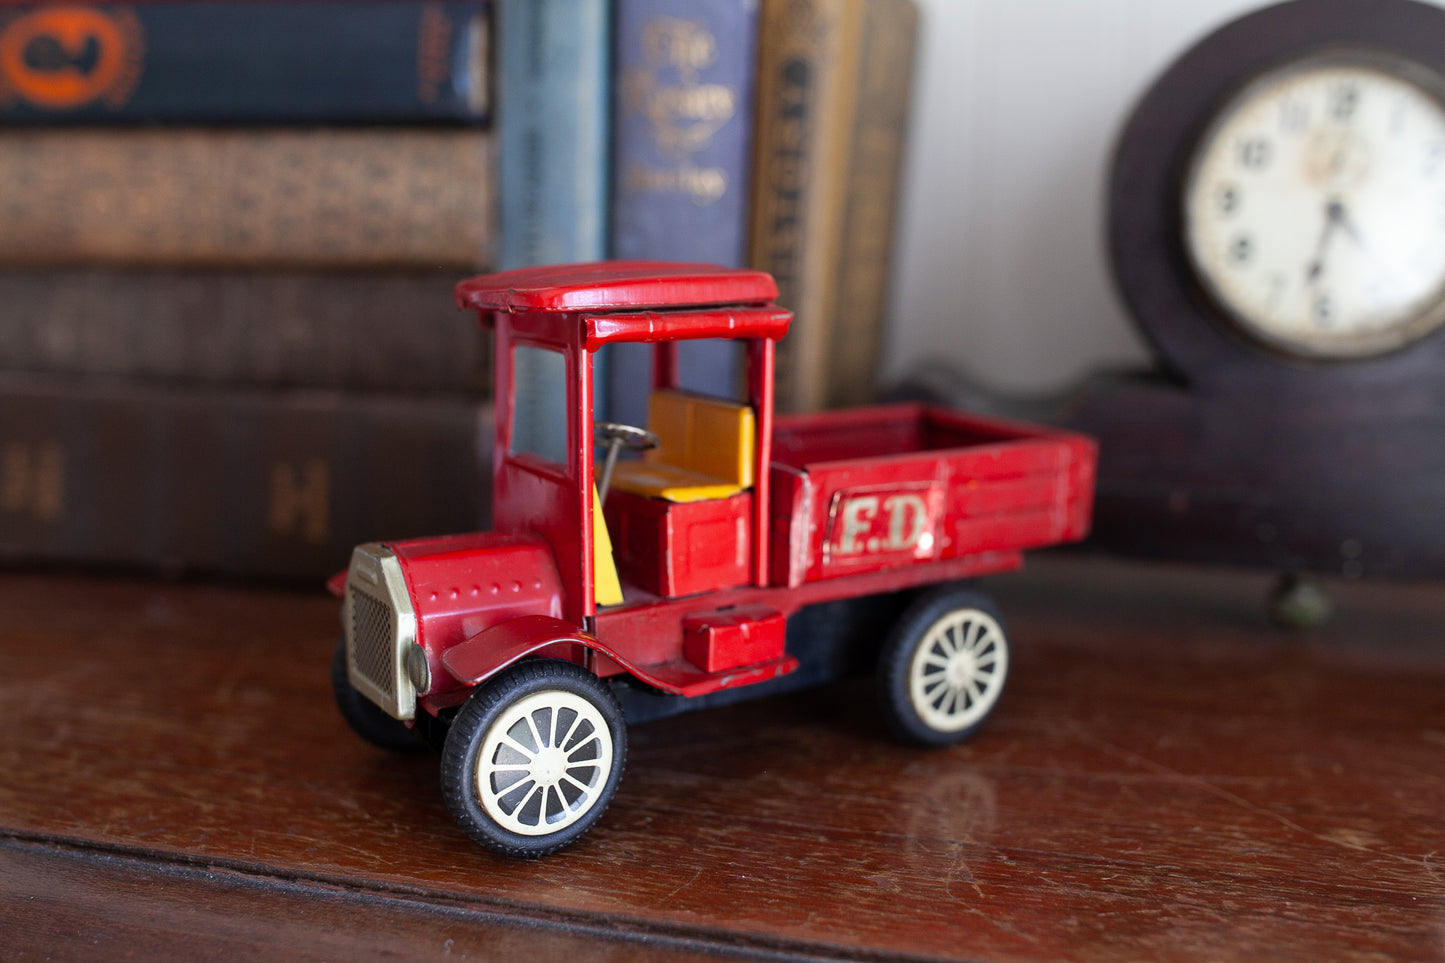 Vintage Toy Truck - Tin Toy Fire Truck -Made in Japan -Friction Toy